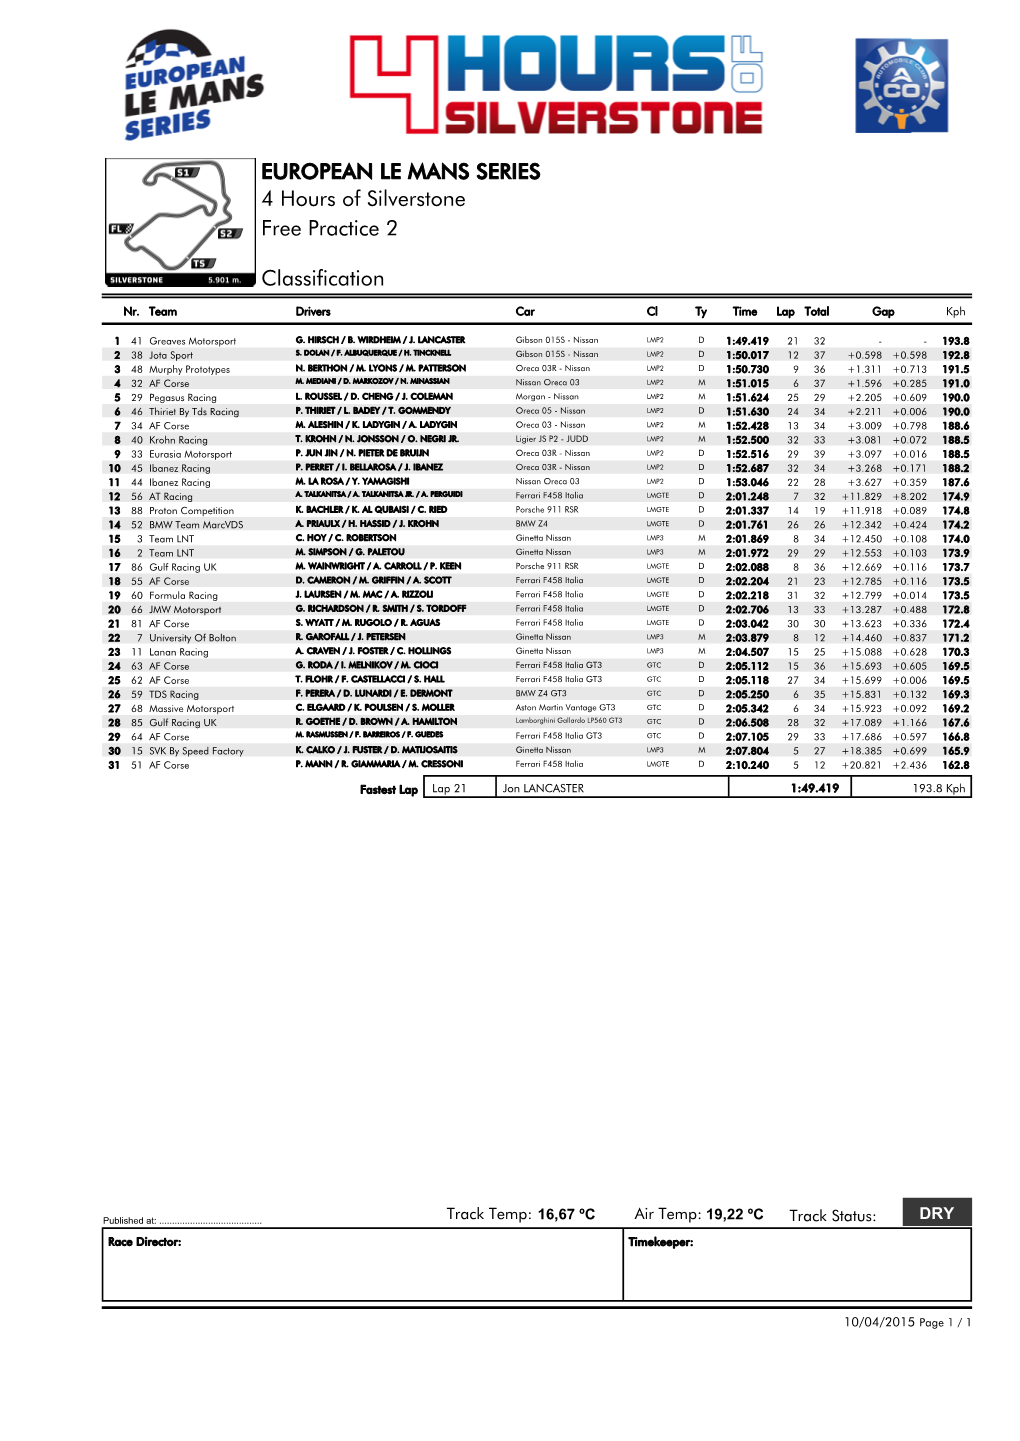 EUROPEAN LE MANS SERIES 4 Hours of Silverstone Free Practice 2